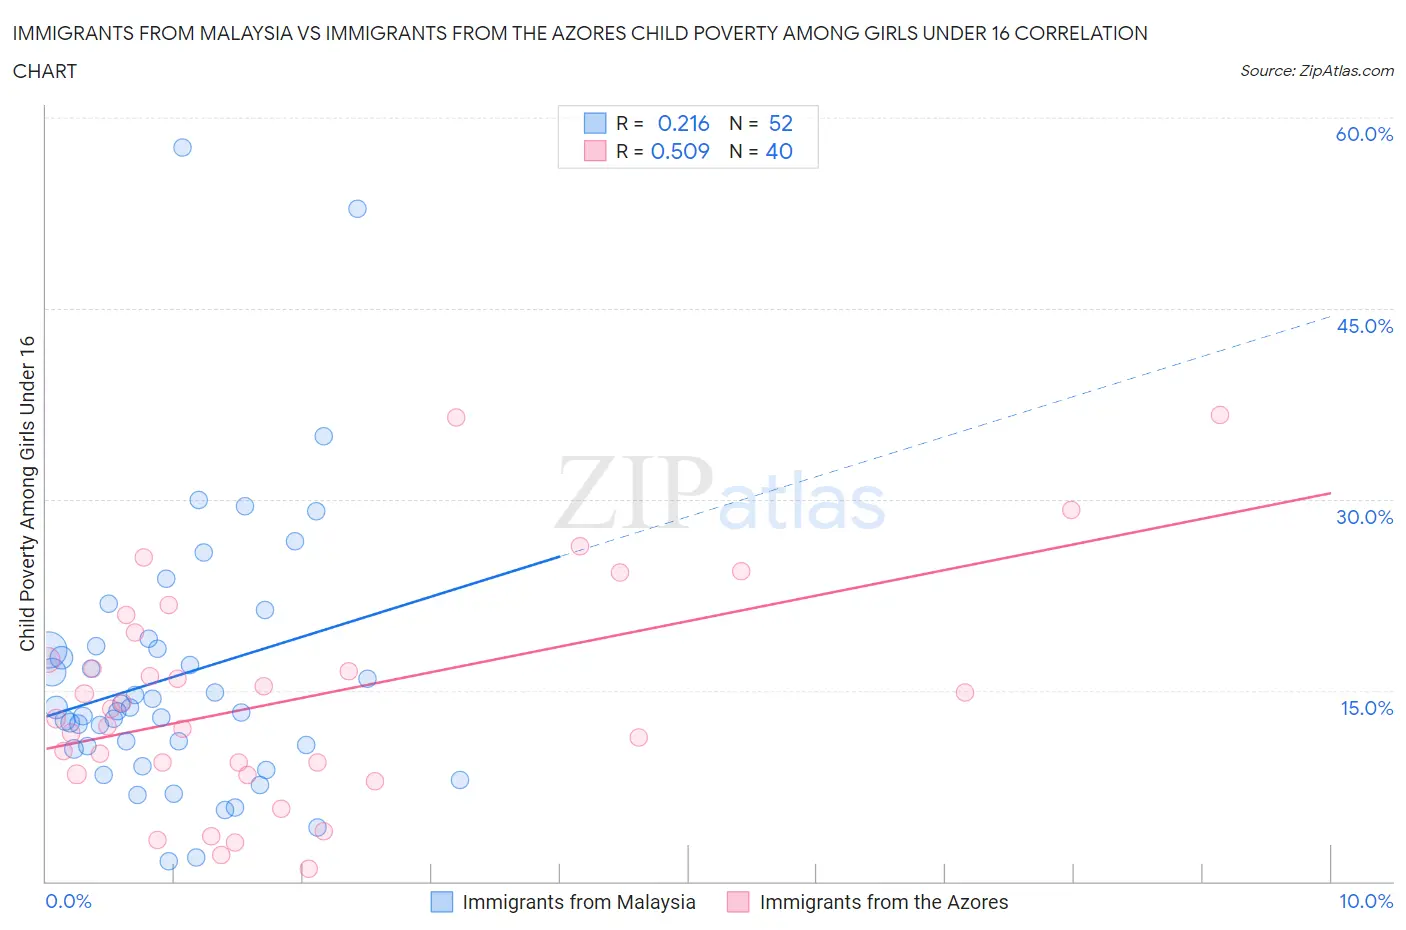 Immigrants from Malaysia vs Immigrants from the Azores Child Poverty Among Girls Under 16